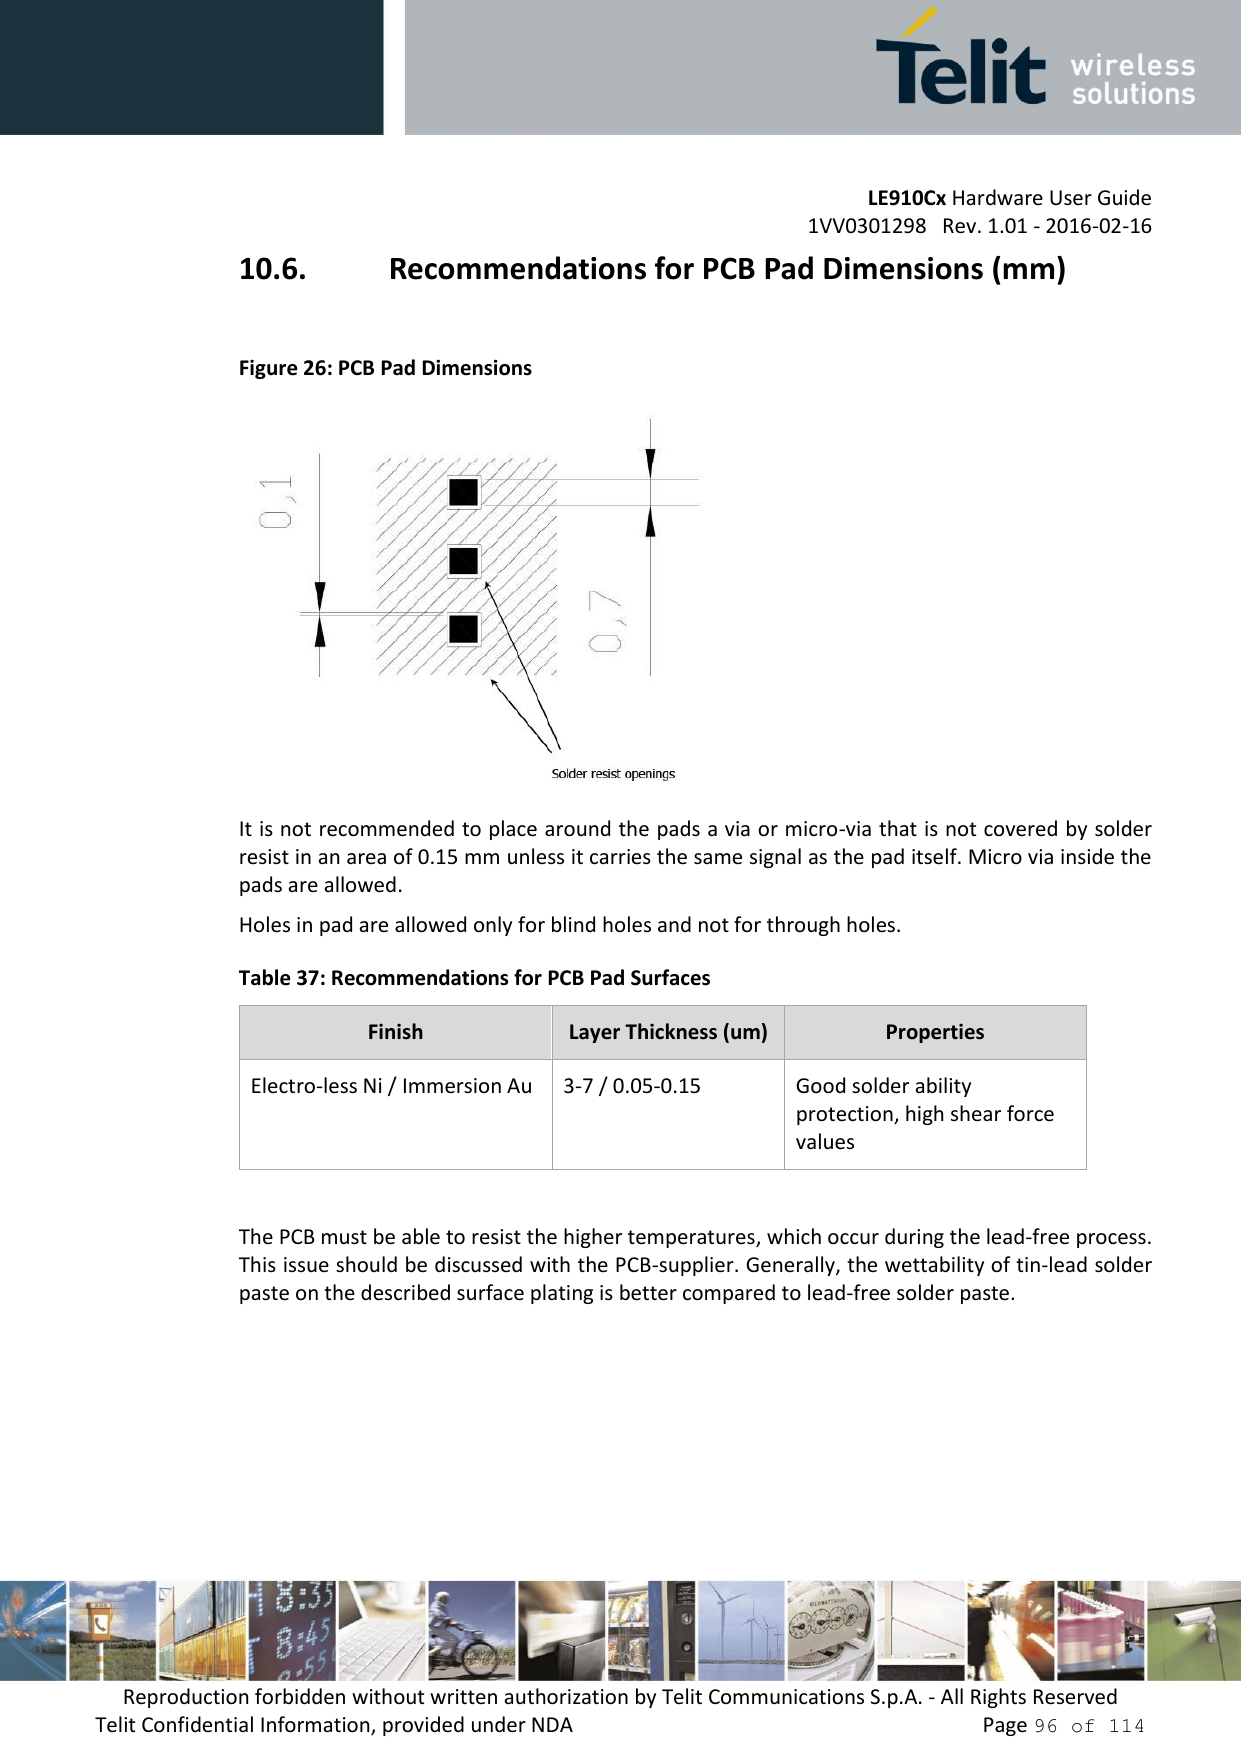 LE910Cx Hardware User Guide 1VV0301298   Rev. 1.01 - 2016-02-16 Reproduction forbidden without written authorization by Telit Communications S.p.A. - All Rights Reserved Telit Confidential Information, provided under NDA   Page 96 of 114 10.6. Recommendations for PCB Pad Dimensions (mm) Figure 26: PCB Pad Dimensions It is not recommended to place around the pads a via or micro-via that is not covered by solder resist in an area of 0.15 mm unless it carries the same signal as the pad itself. Micro via inside the pads are allowed. Holes in pad are allowed only for blind holes and not for through holes. Table 37: Recommendations for PCB Pad Surfaces Finish Layer Thickness (um) Properties Electro-less Ni / Immersion Au 3-7 / 0.05-0.15Good solder ability protection, high shear force values The PCB must be able to resist the higher temperatures, which occur during the lead-free process. This issue should be discussed with the PCB-supplier. Generally, the wettability of tin-lead solder paste on the described surface plating is better compared to lead-free solder paste. 